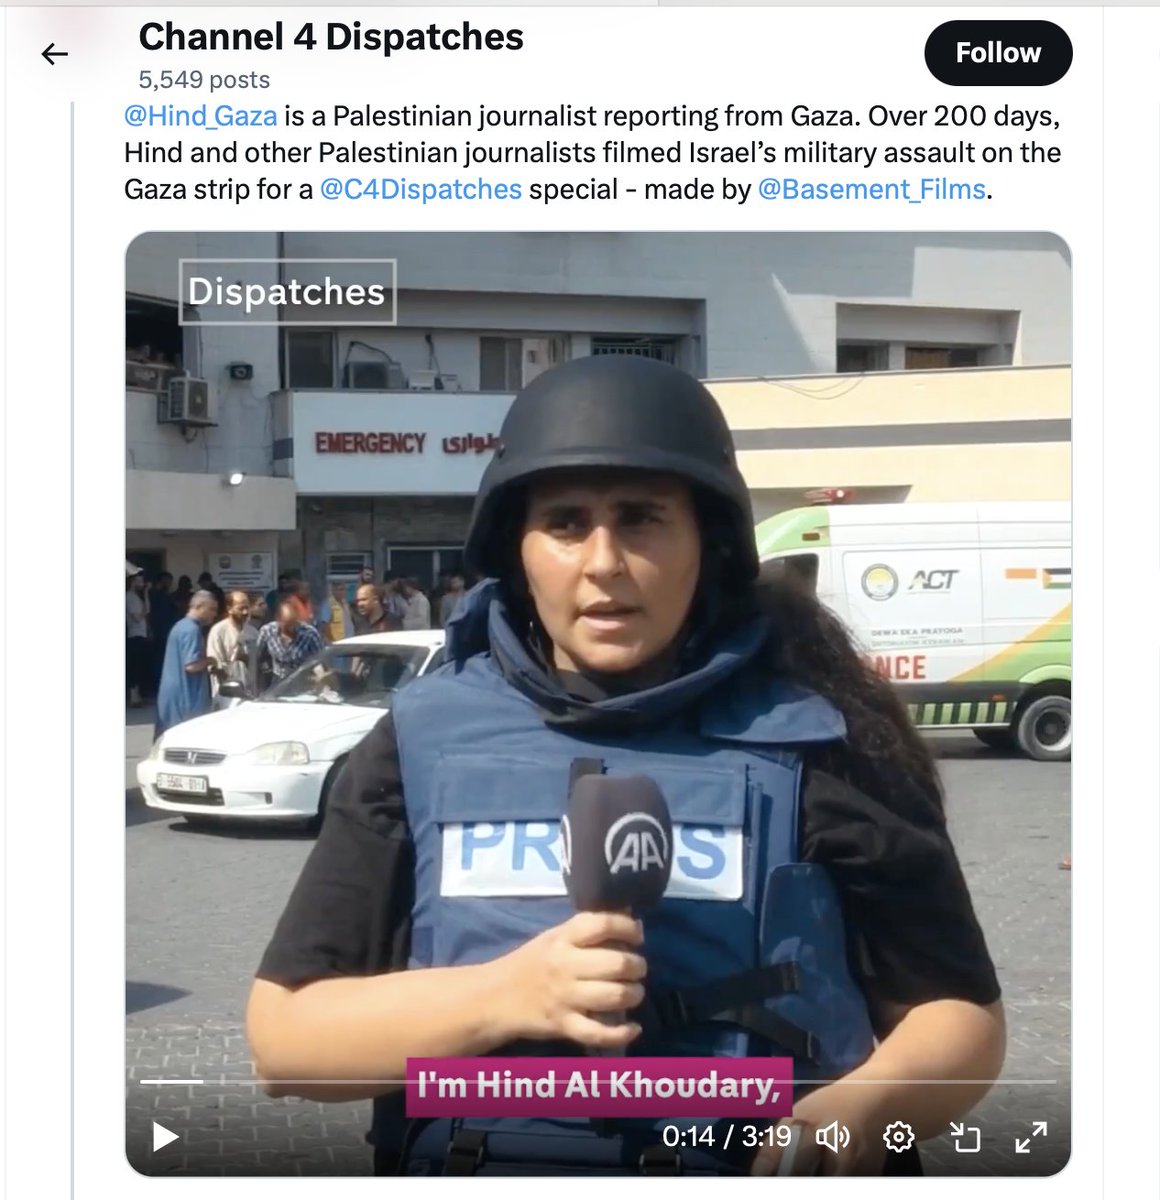 Hind Khoudary: 1. Praised Islamic Jihad terrorists 2. Promoted Hezbollah's Nasrallah 3. Snitched & handed a Gazan peace activist to Hamas 4. Posted it's best to die a martyr (terrorist) with a gun 5. Said Palestinians should lie for the cause. To Channel 4 she is a journalist: